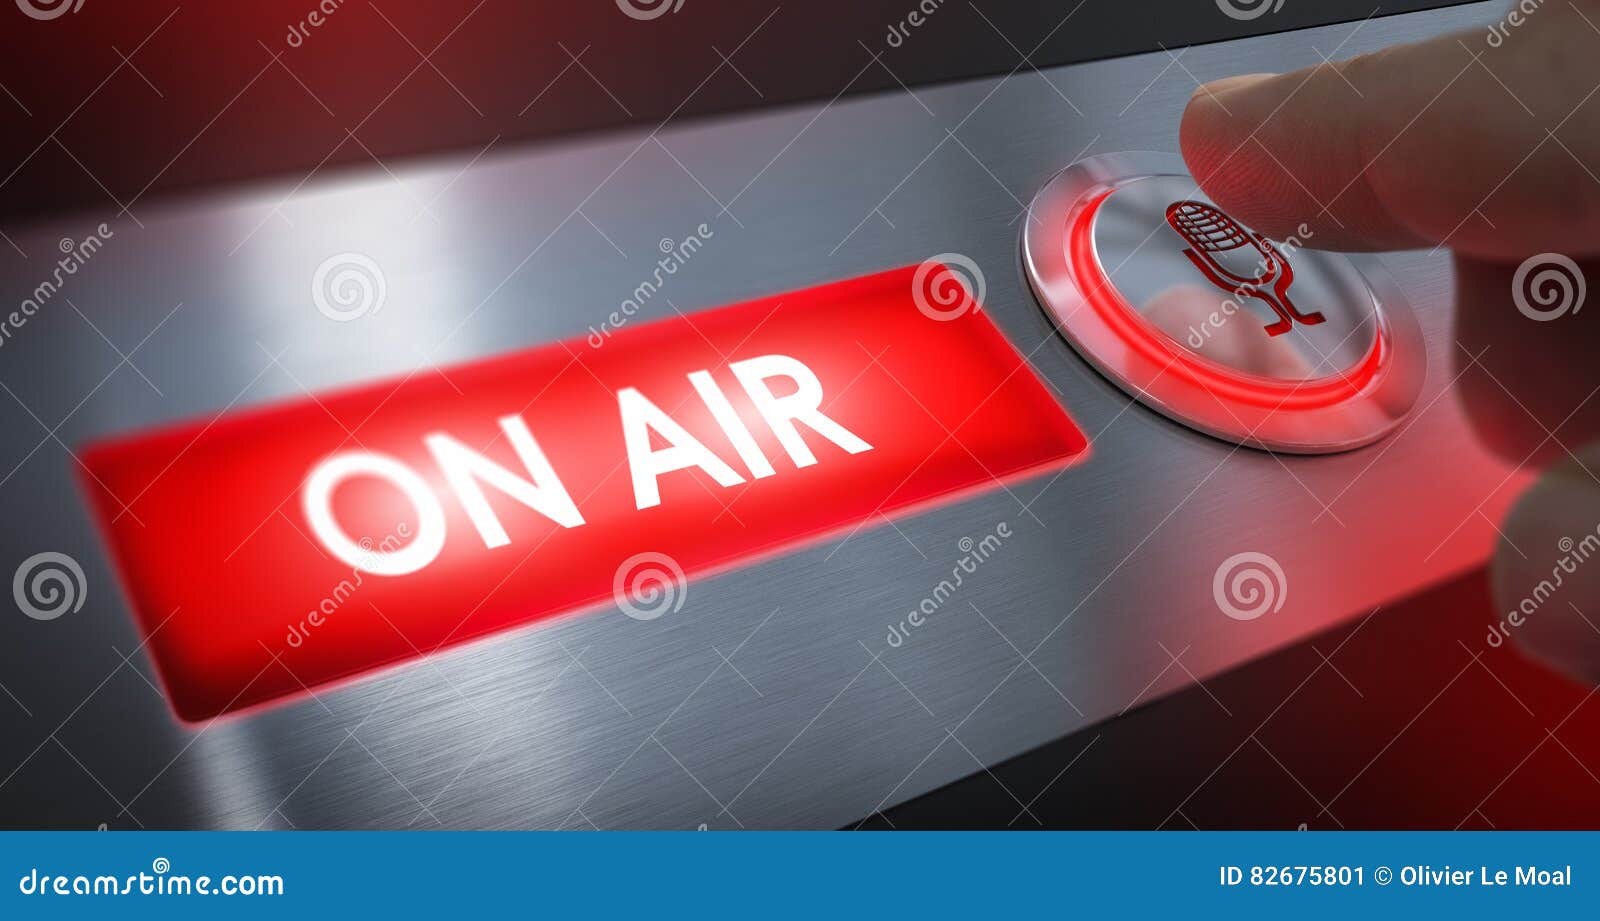 https://thumbs.dreamstime.com/z/radio-station-air-sign-finger-pressing-microphone-button-to-activate-composite-image-d-background-82675801.jpg